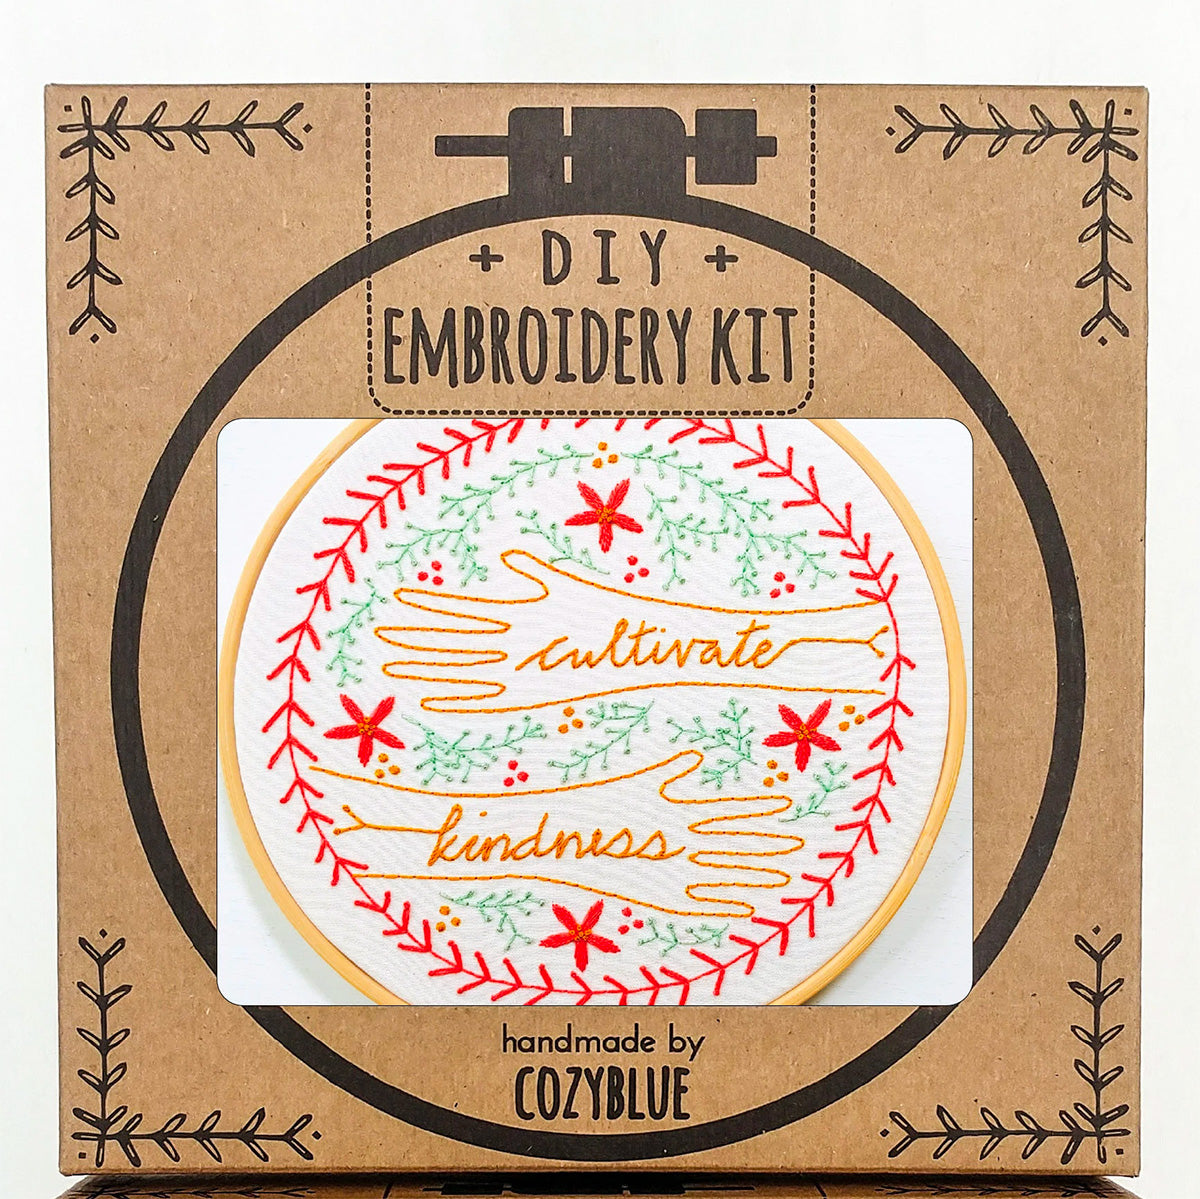 bee lovely embroidery kit – cozyblue